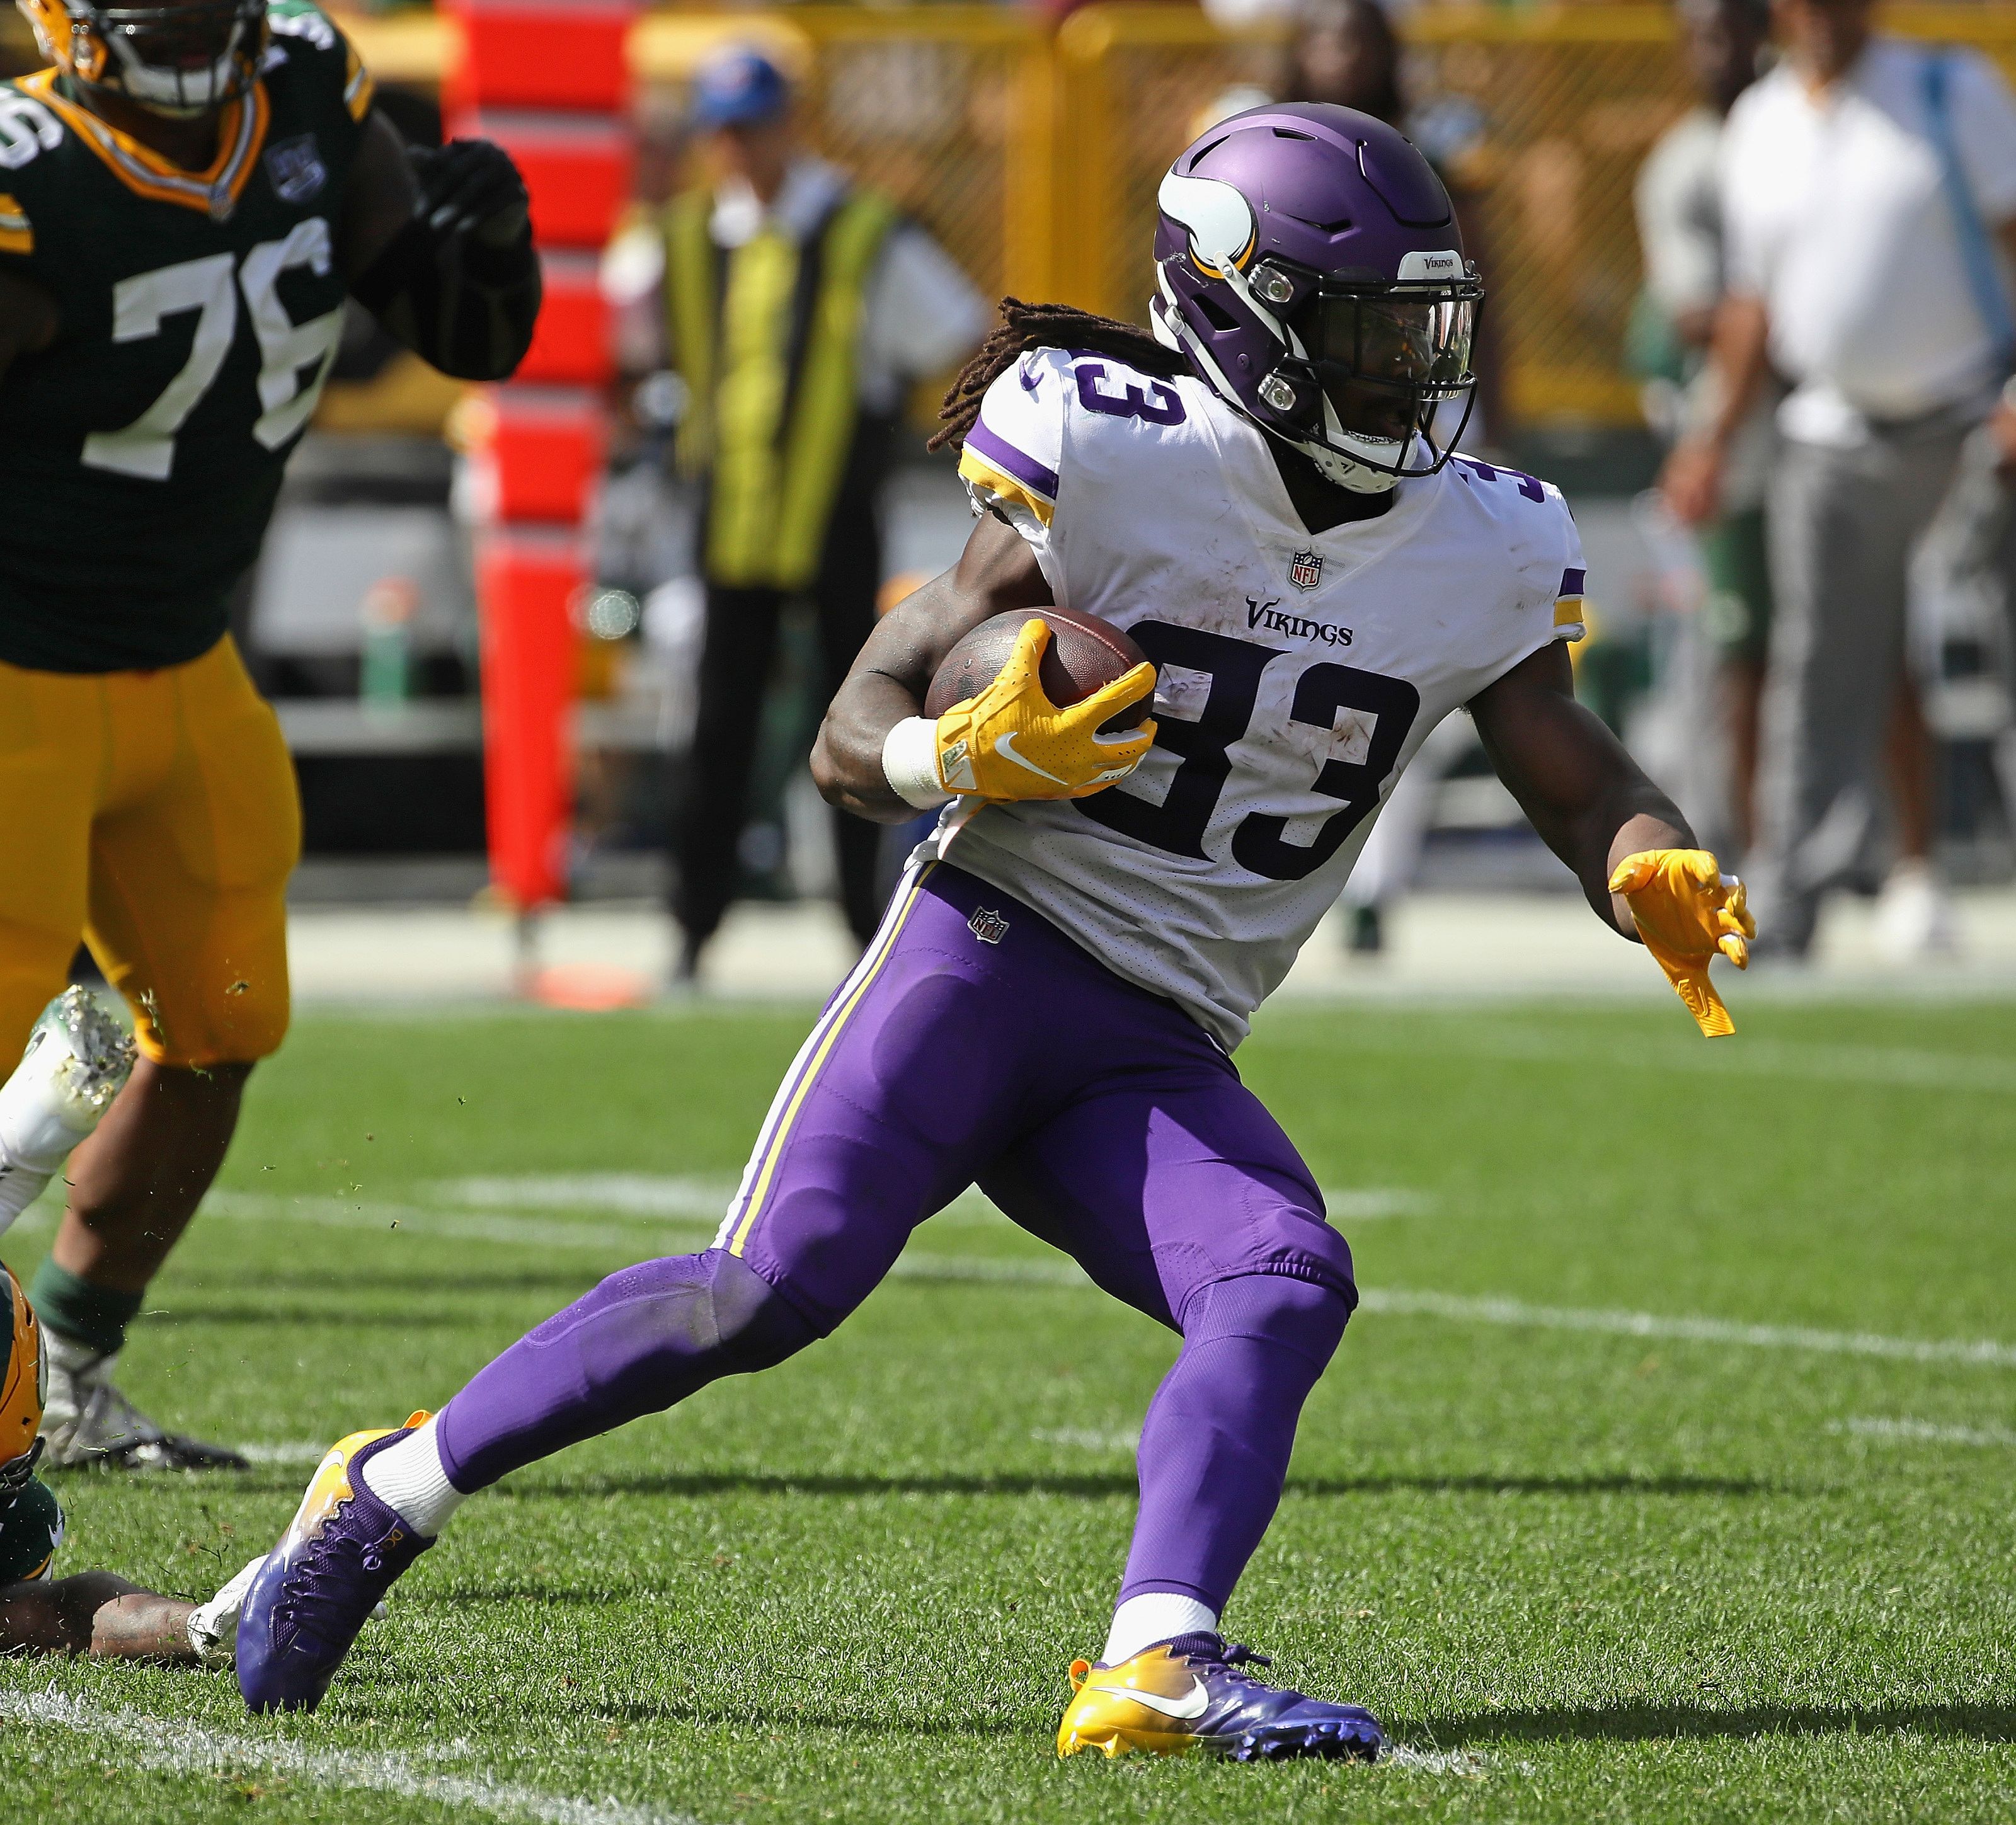 free agent running backs the Minnesota Vikings could sign in 2019